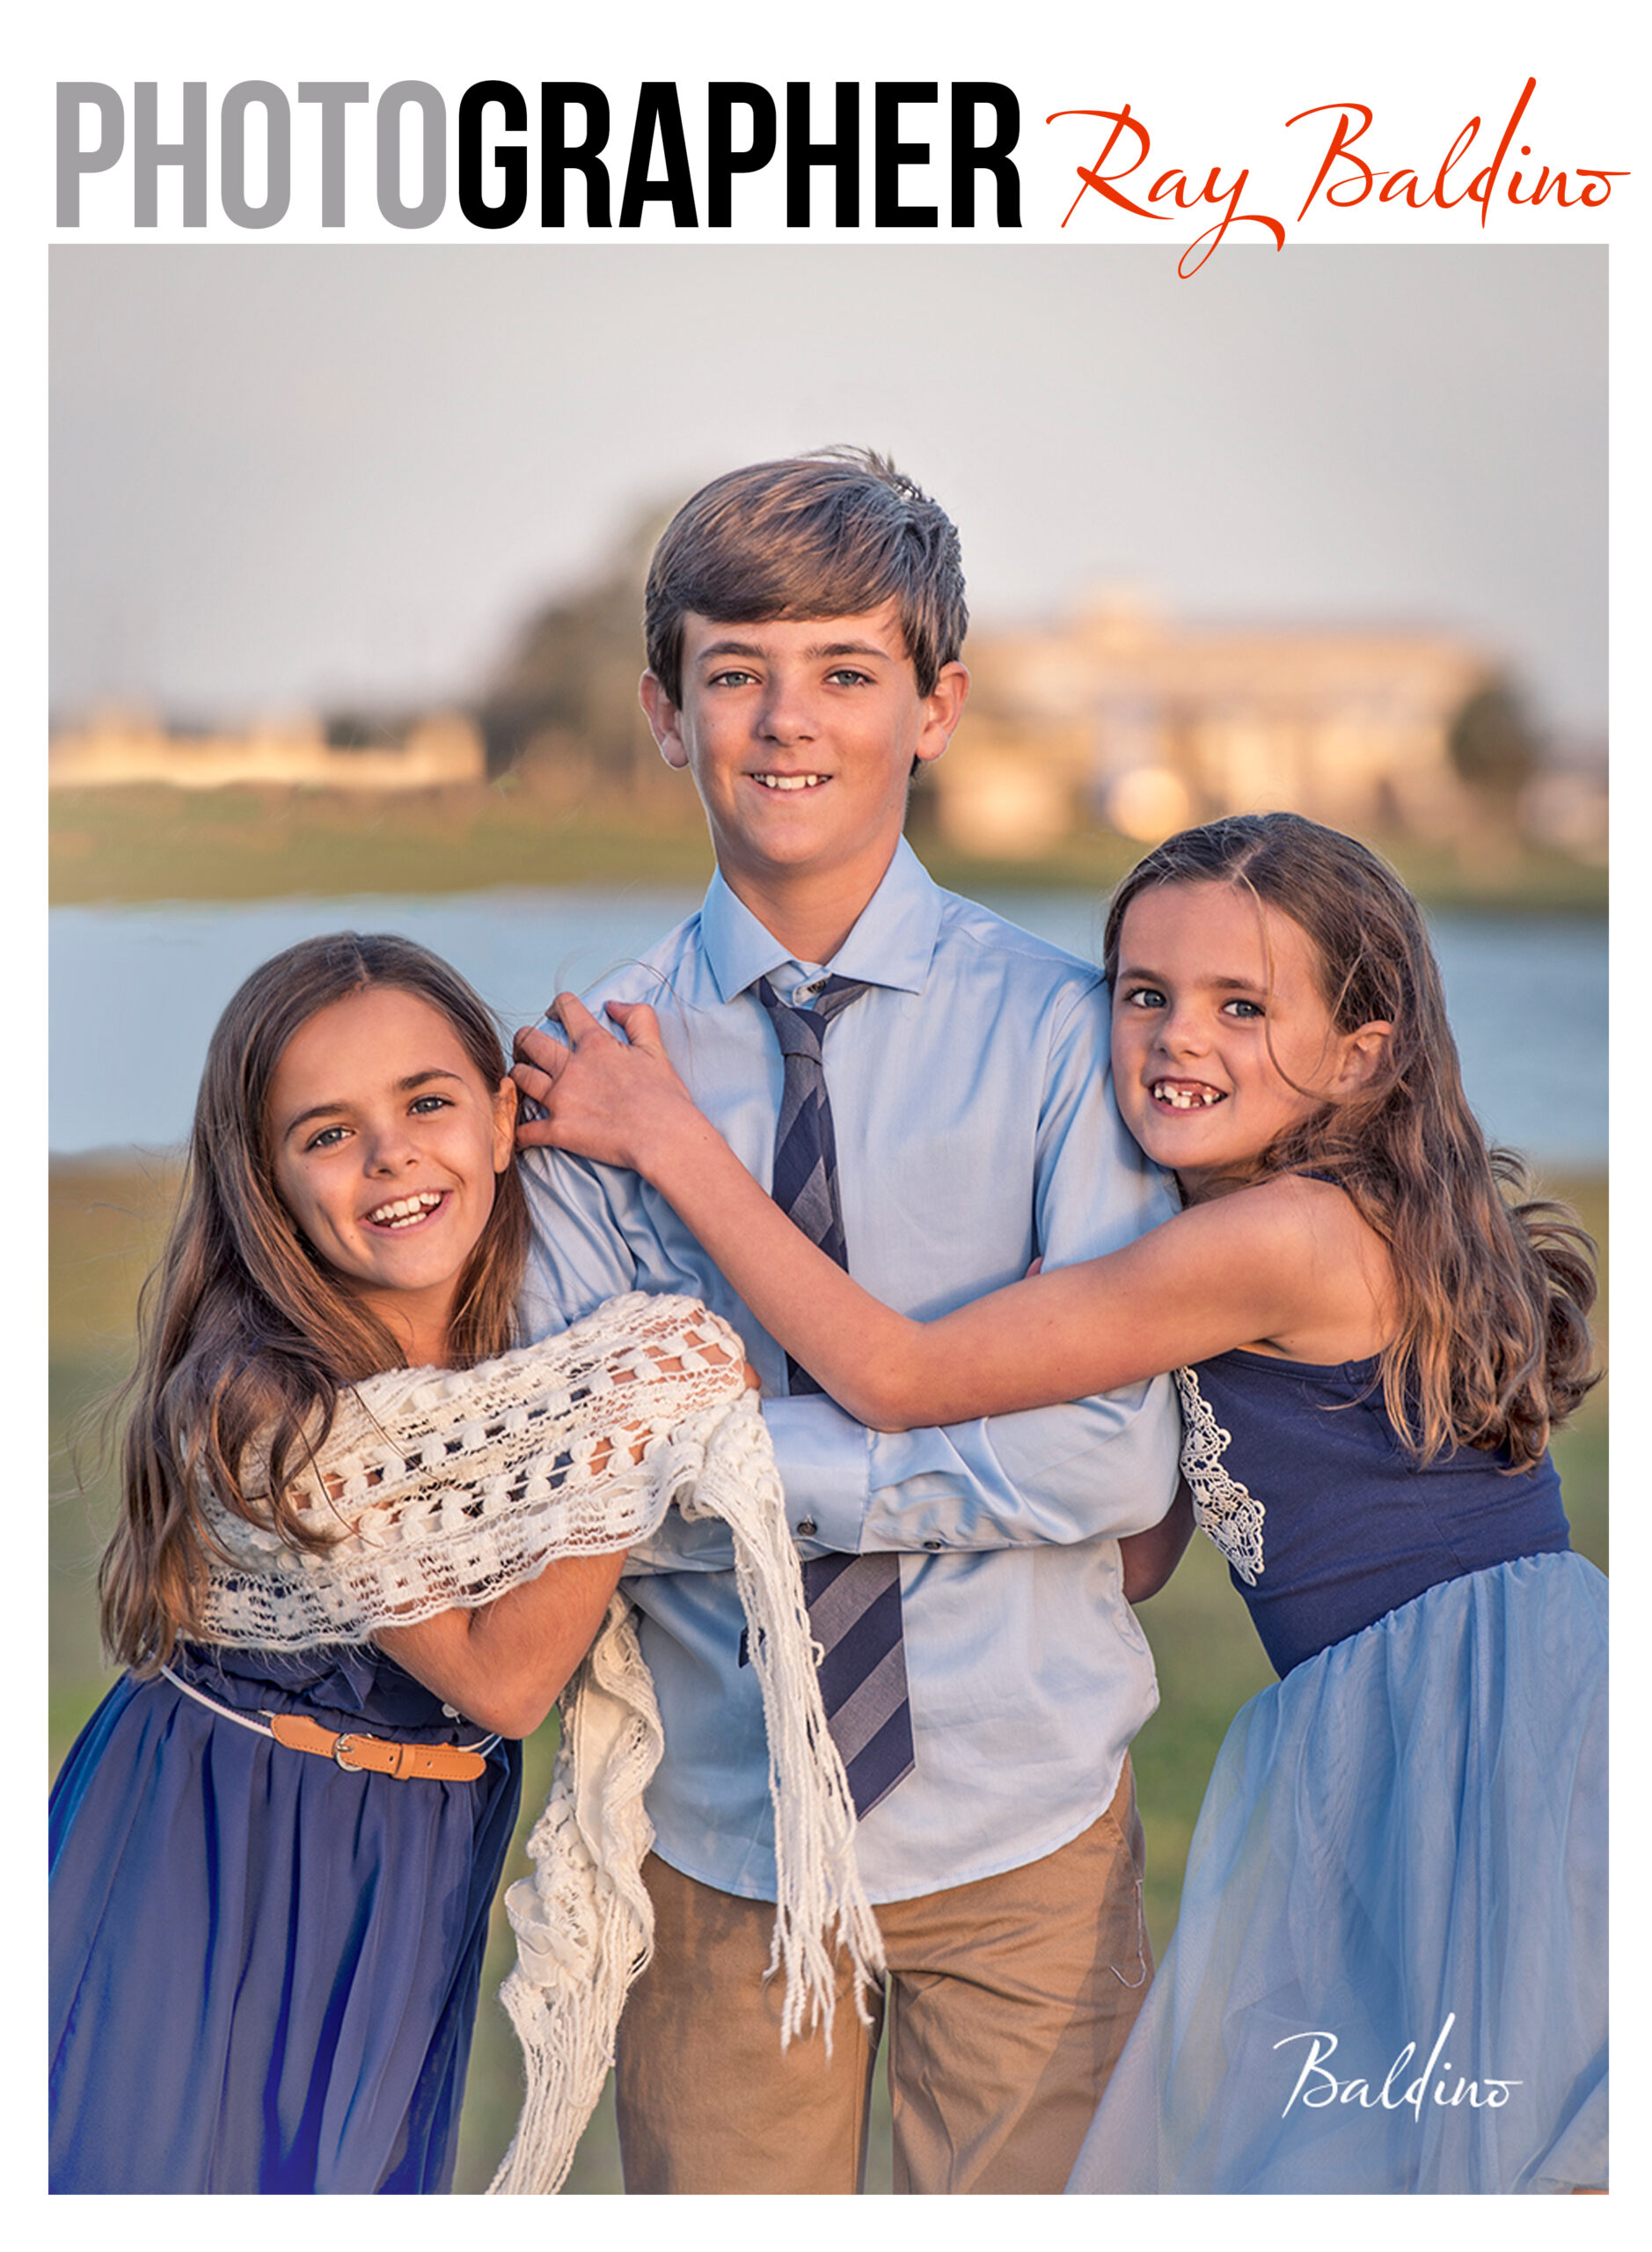 This_is_a_photograph_of _two_sisters_hugging_their_older_brother